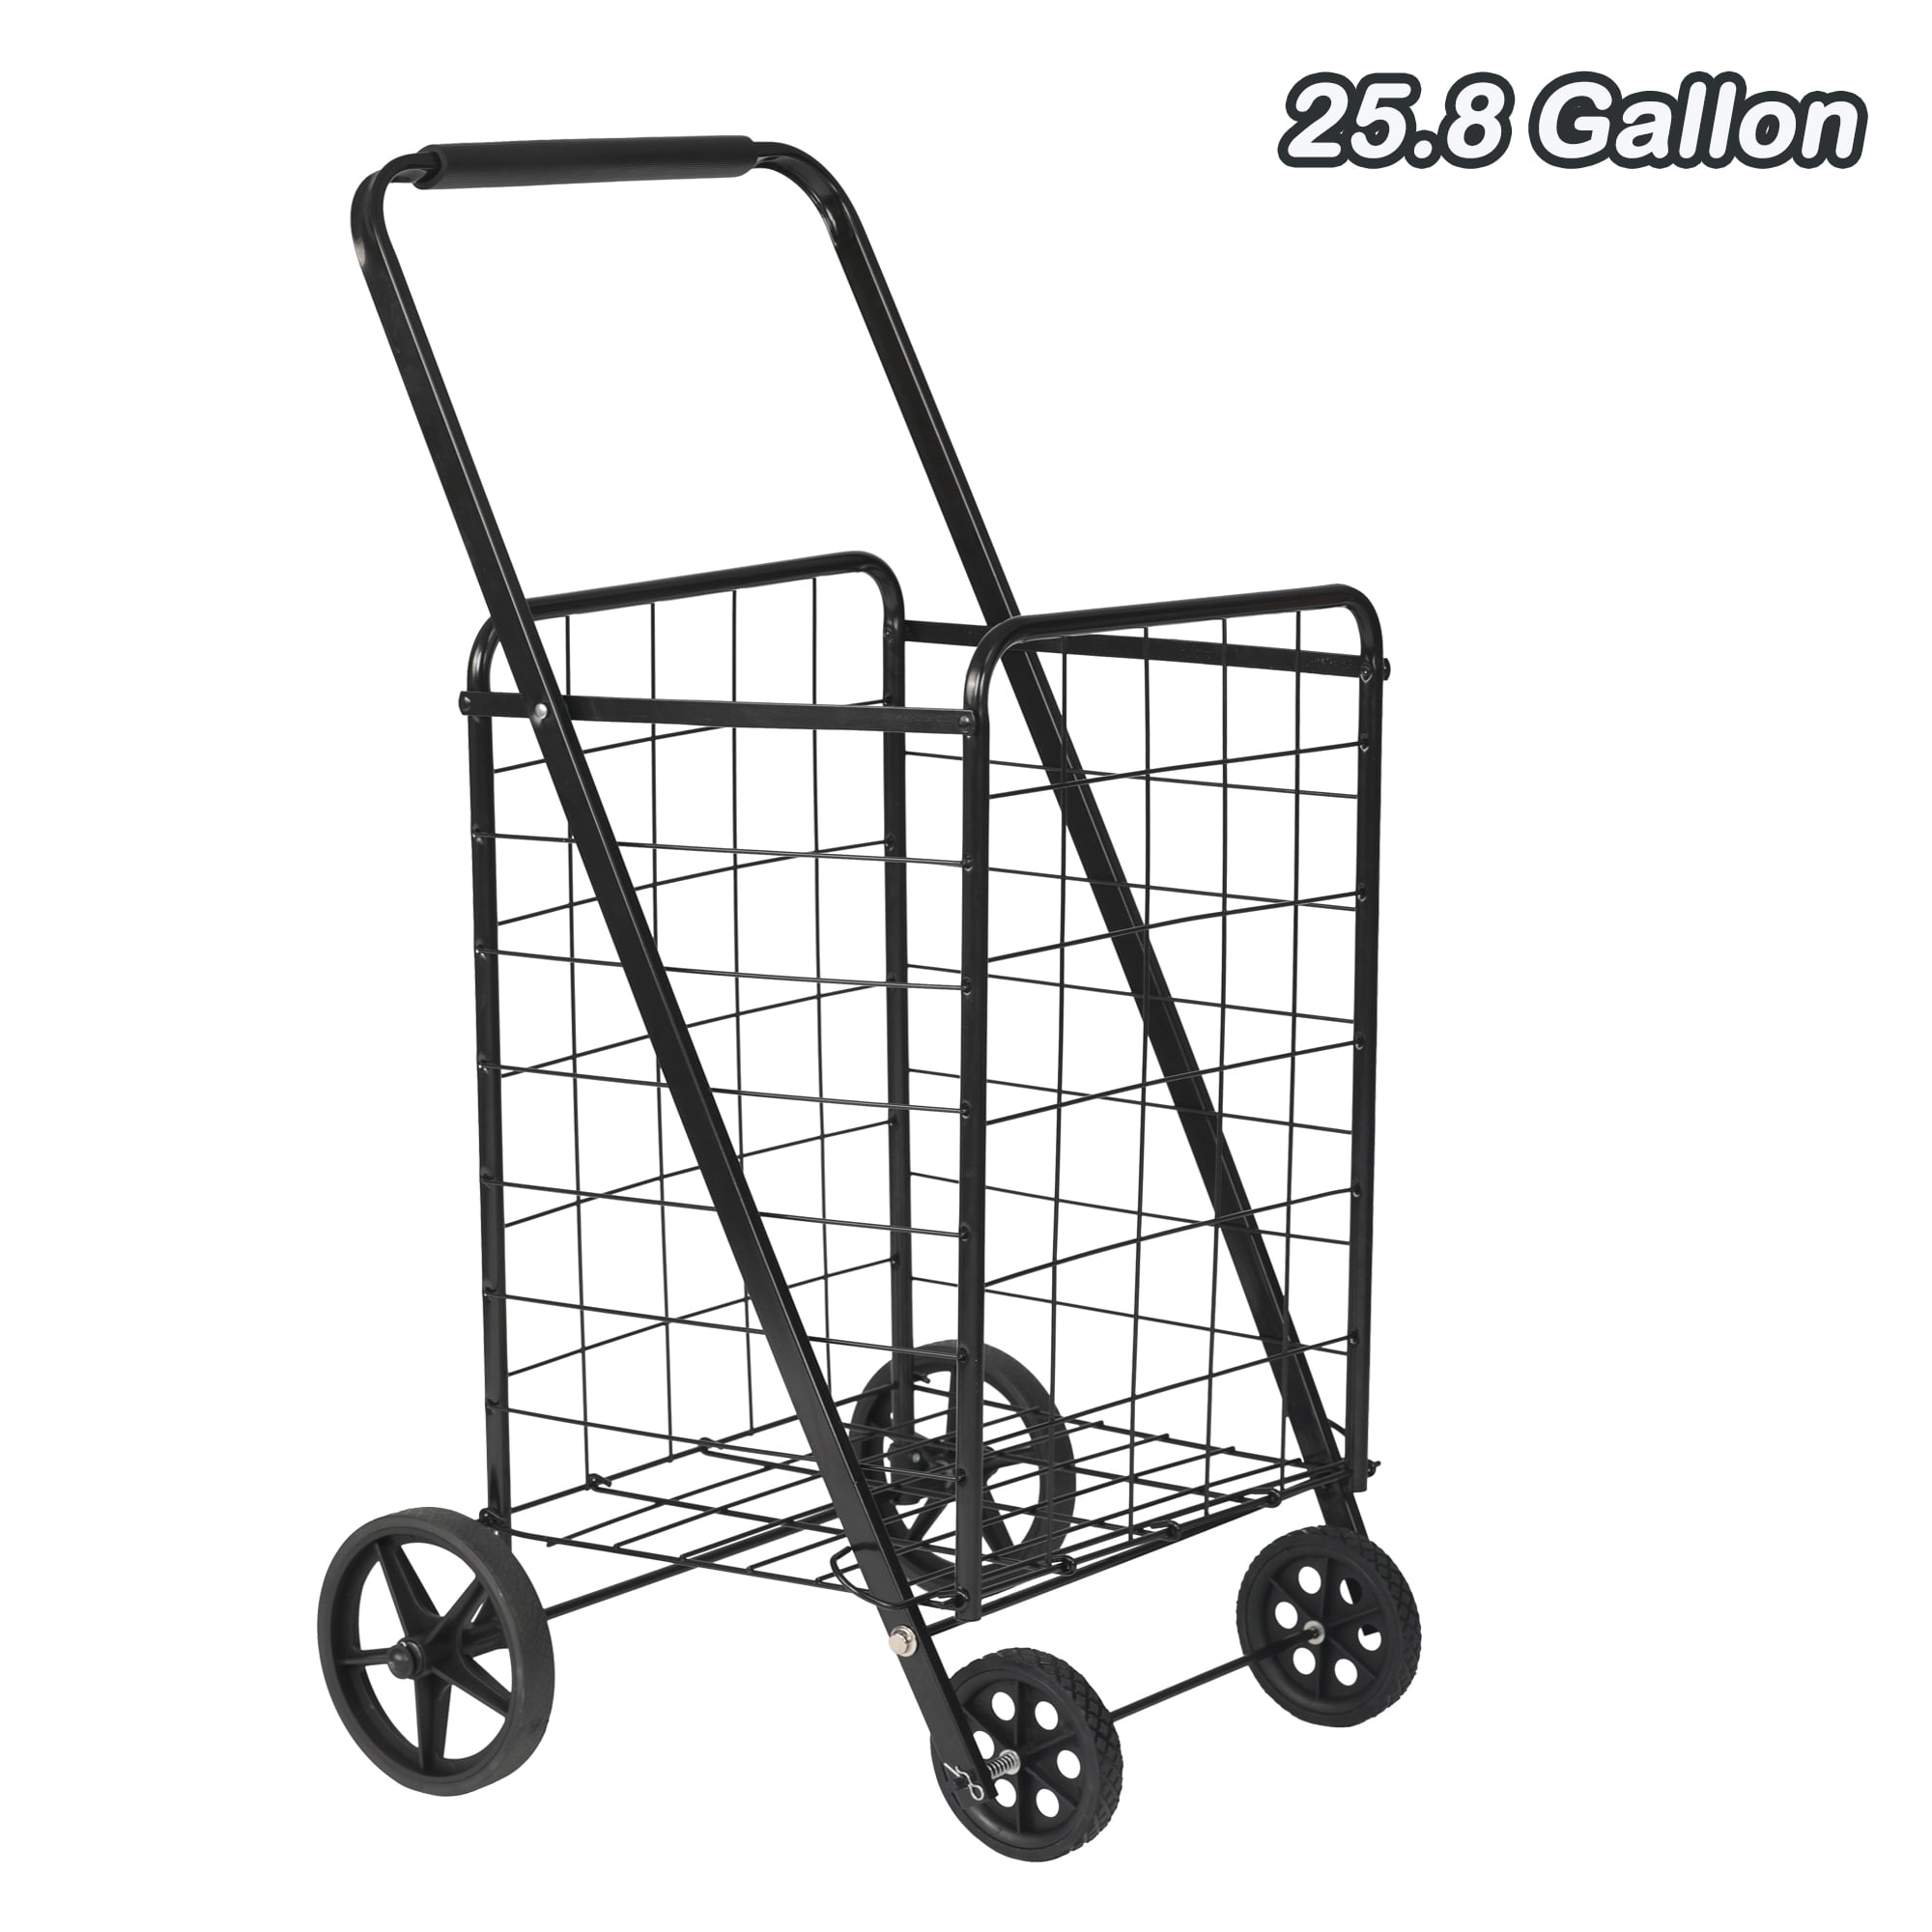 35 kg Moving and Office Use Folds Flat JCX Foldable Heavy Duty Shopping Cart Extra Large Portable Cart Crate Box Trolley for Luggage Auto Personal 